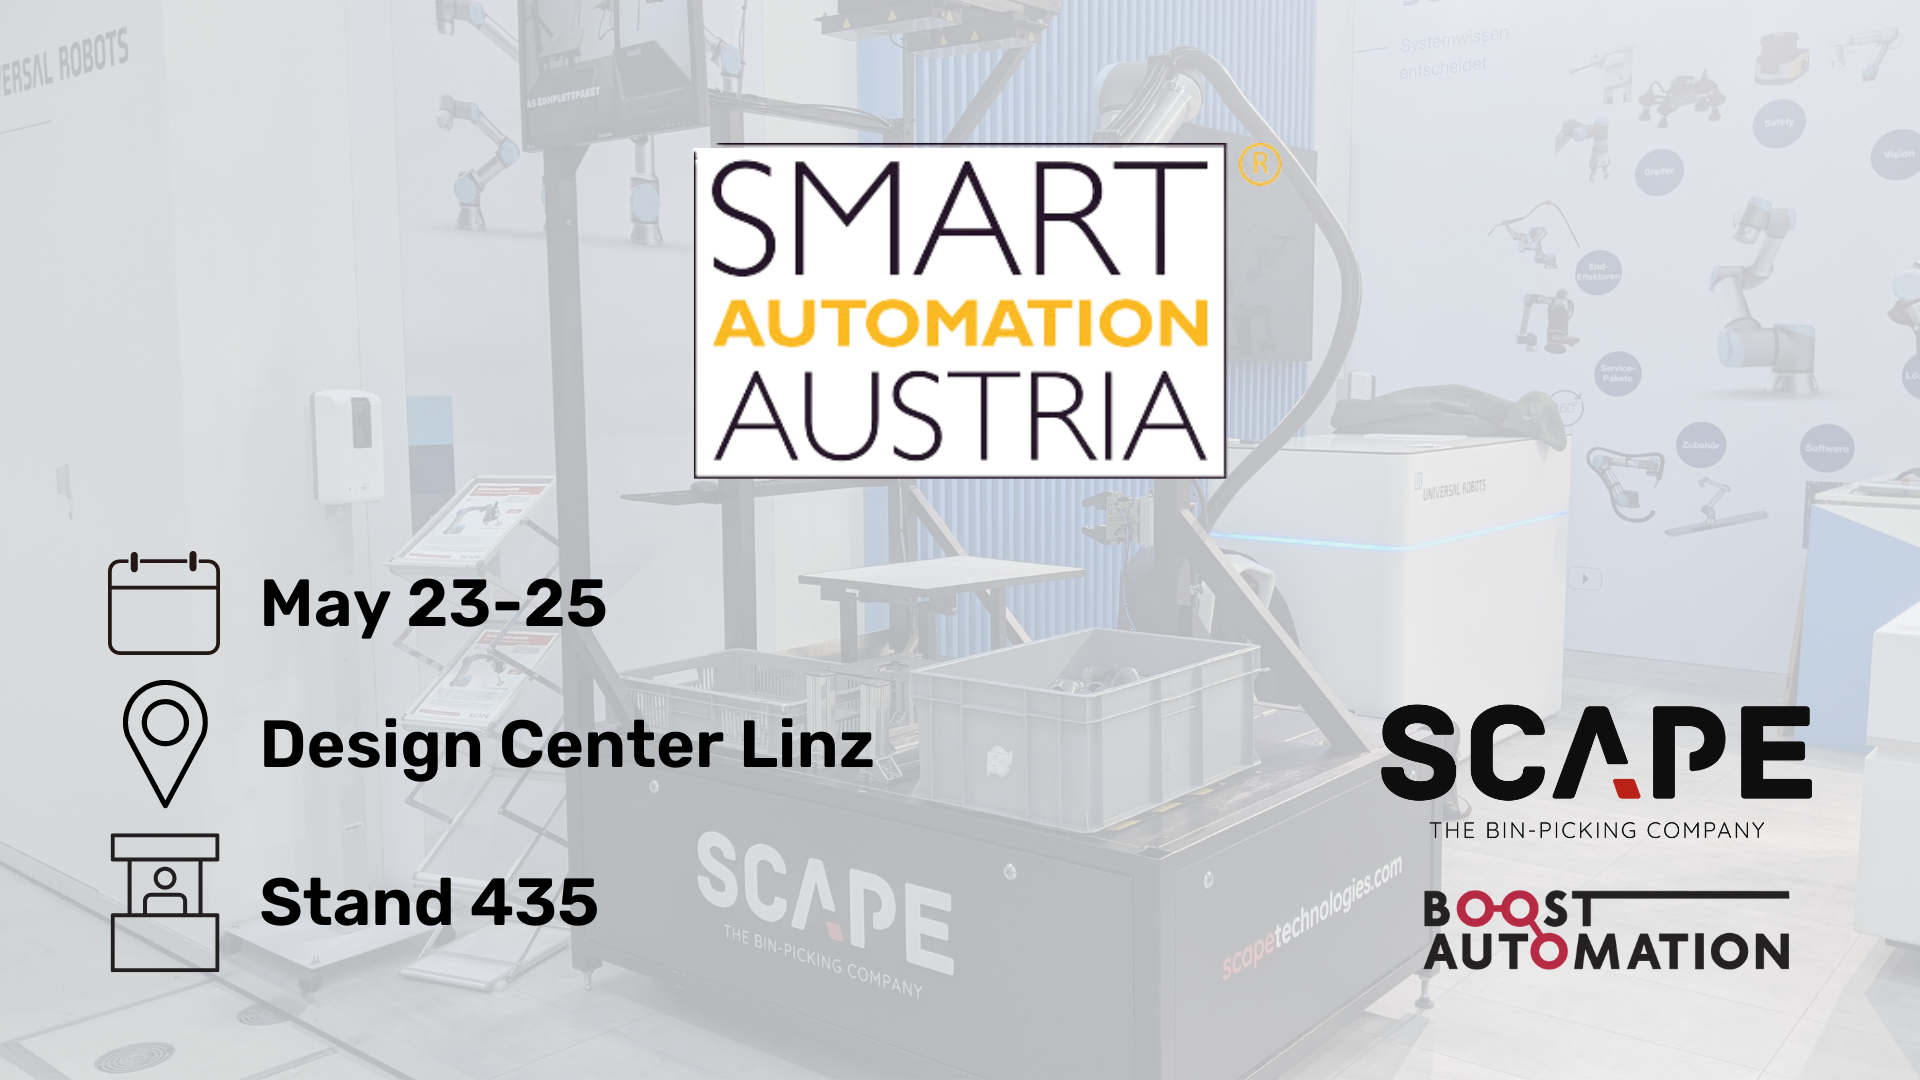 SMART Automation Austria 2023, meet us there. Scape Technologies to showcase bin-picking solutions together with our partner BOOST Automation